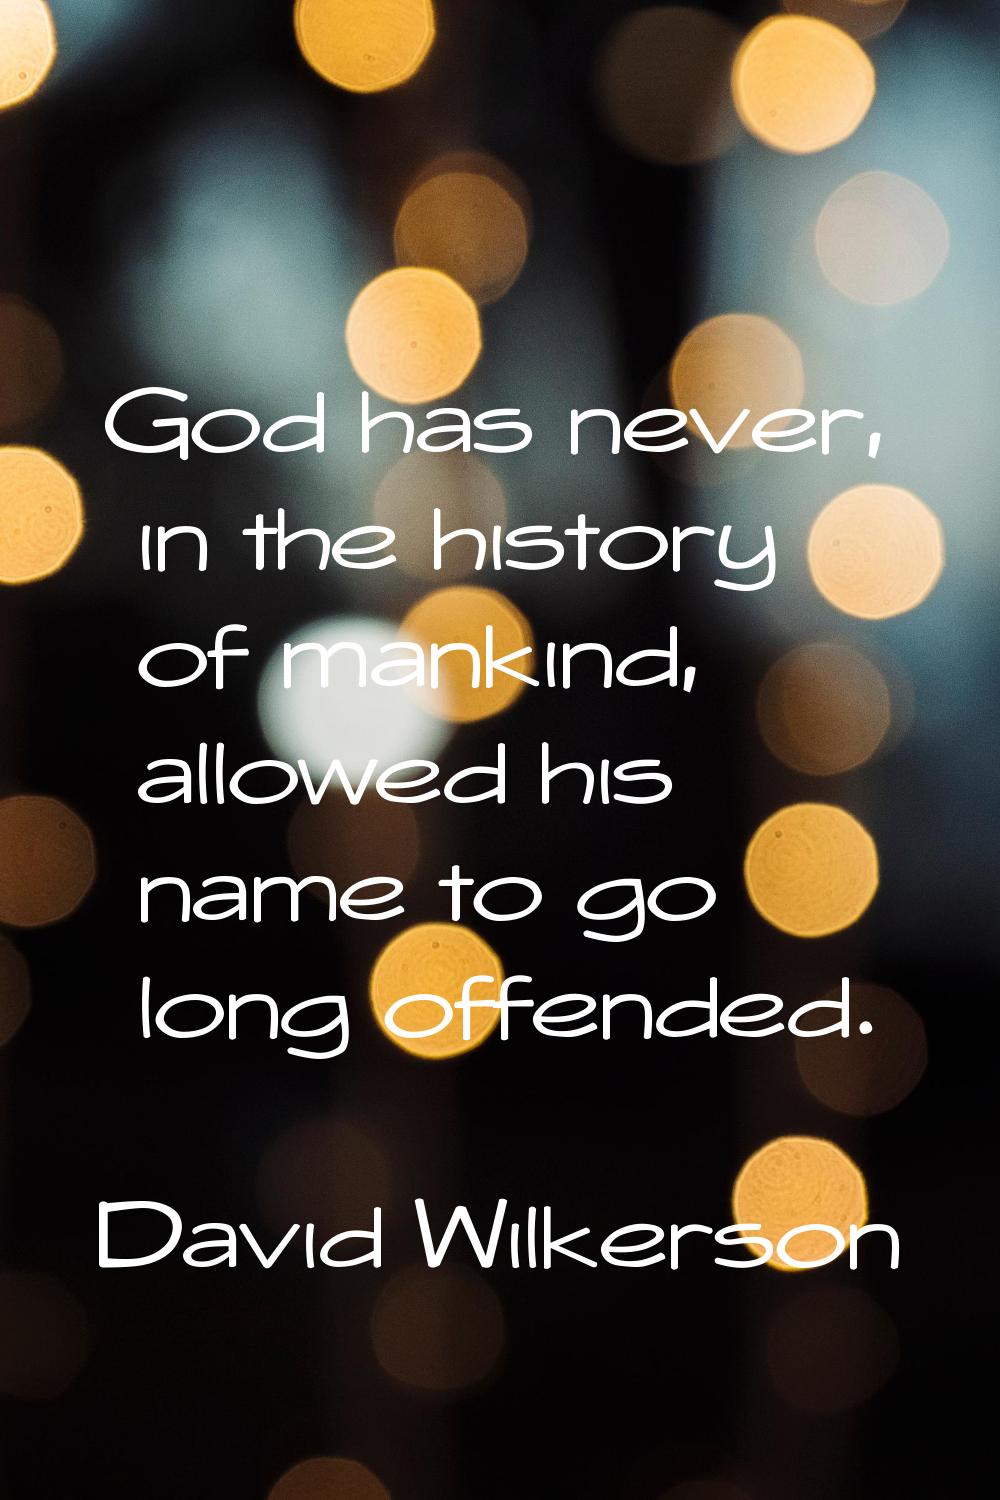 God has never, in the history of mankind, allowed his name to go long offended.